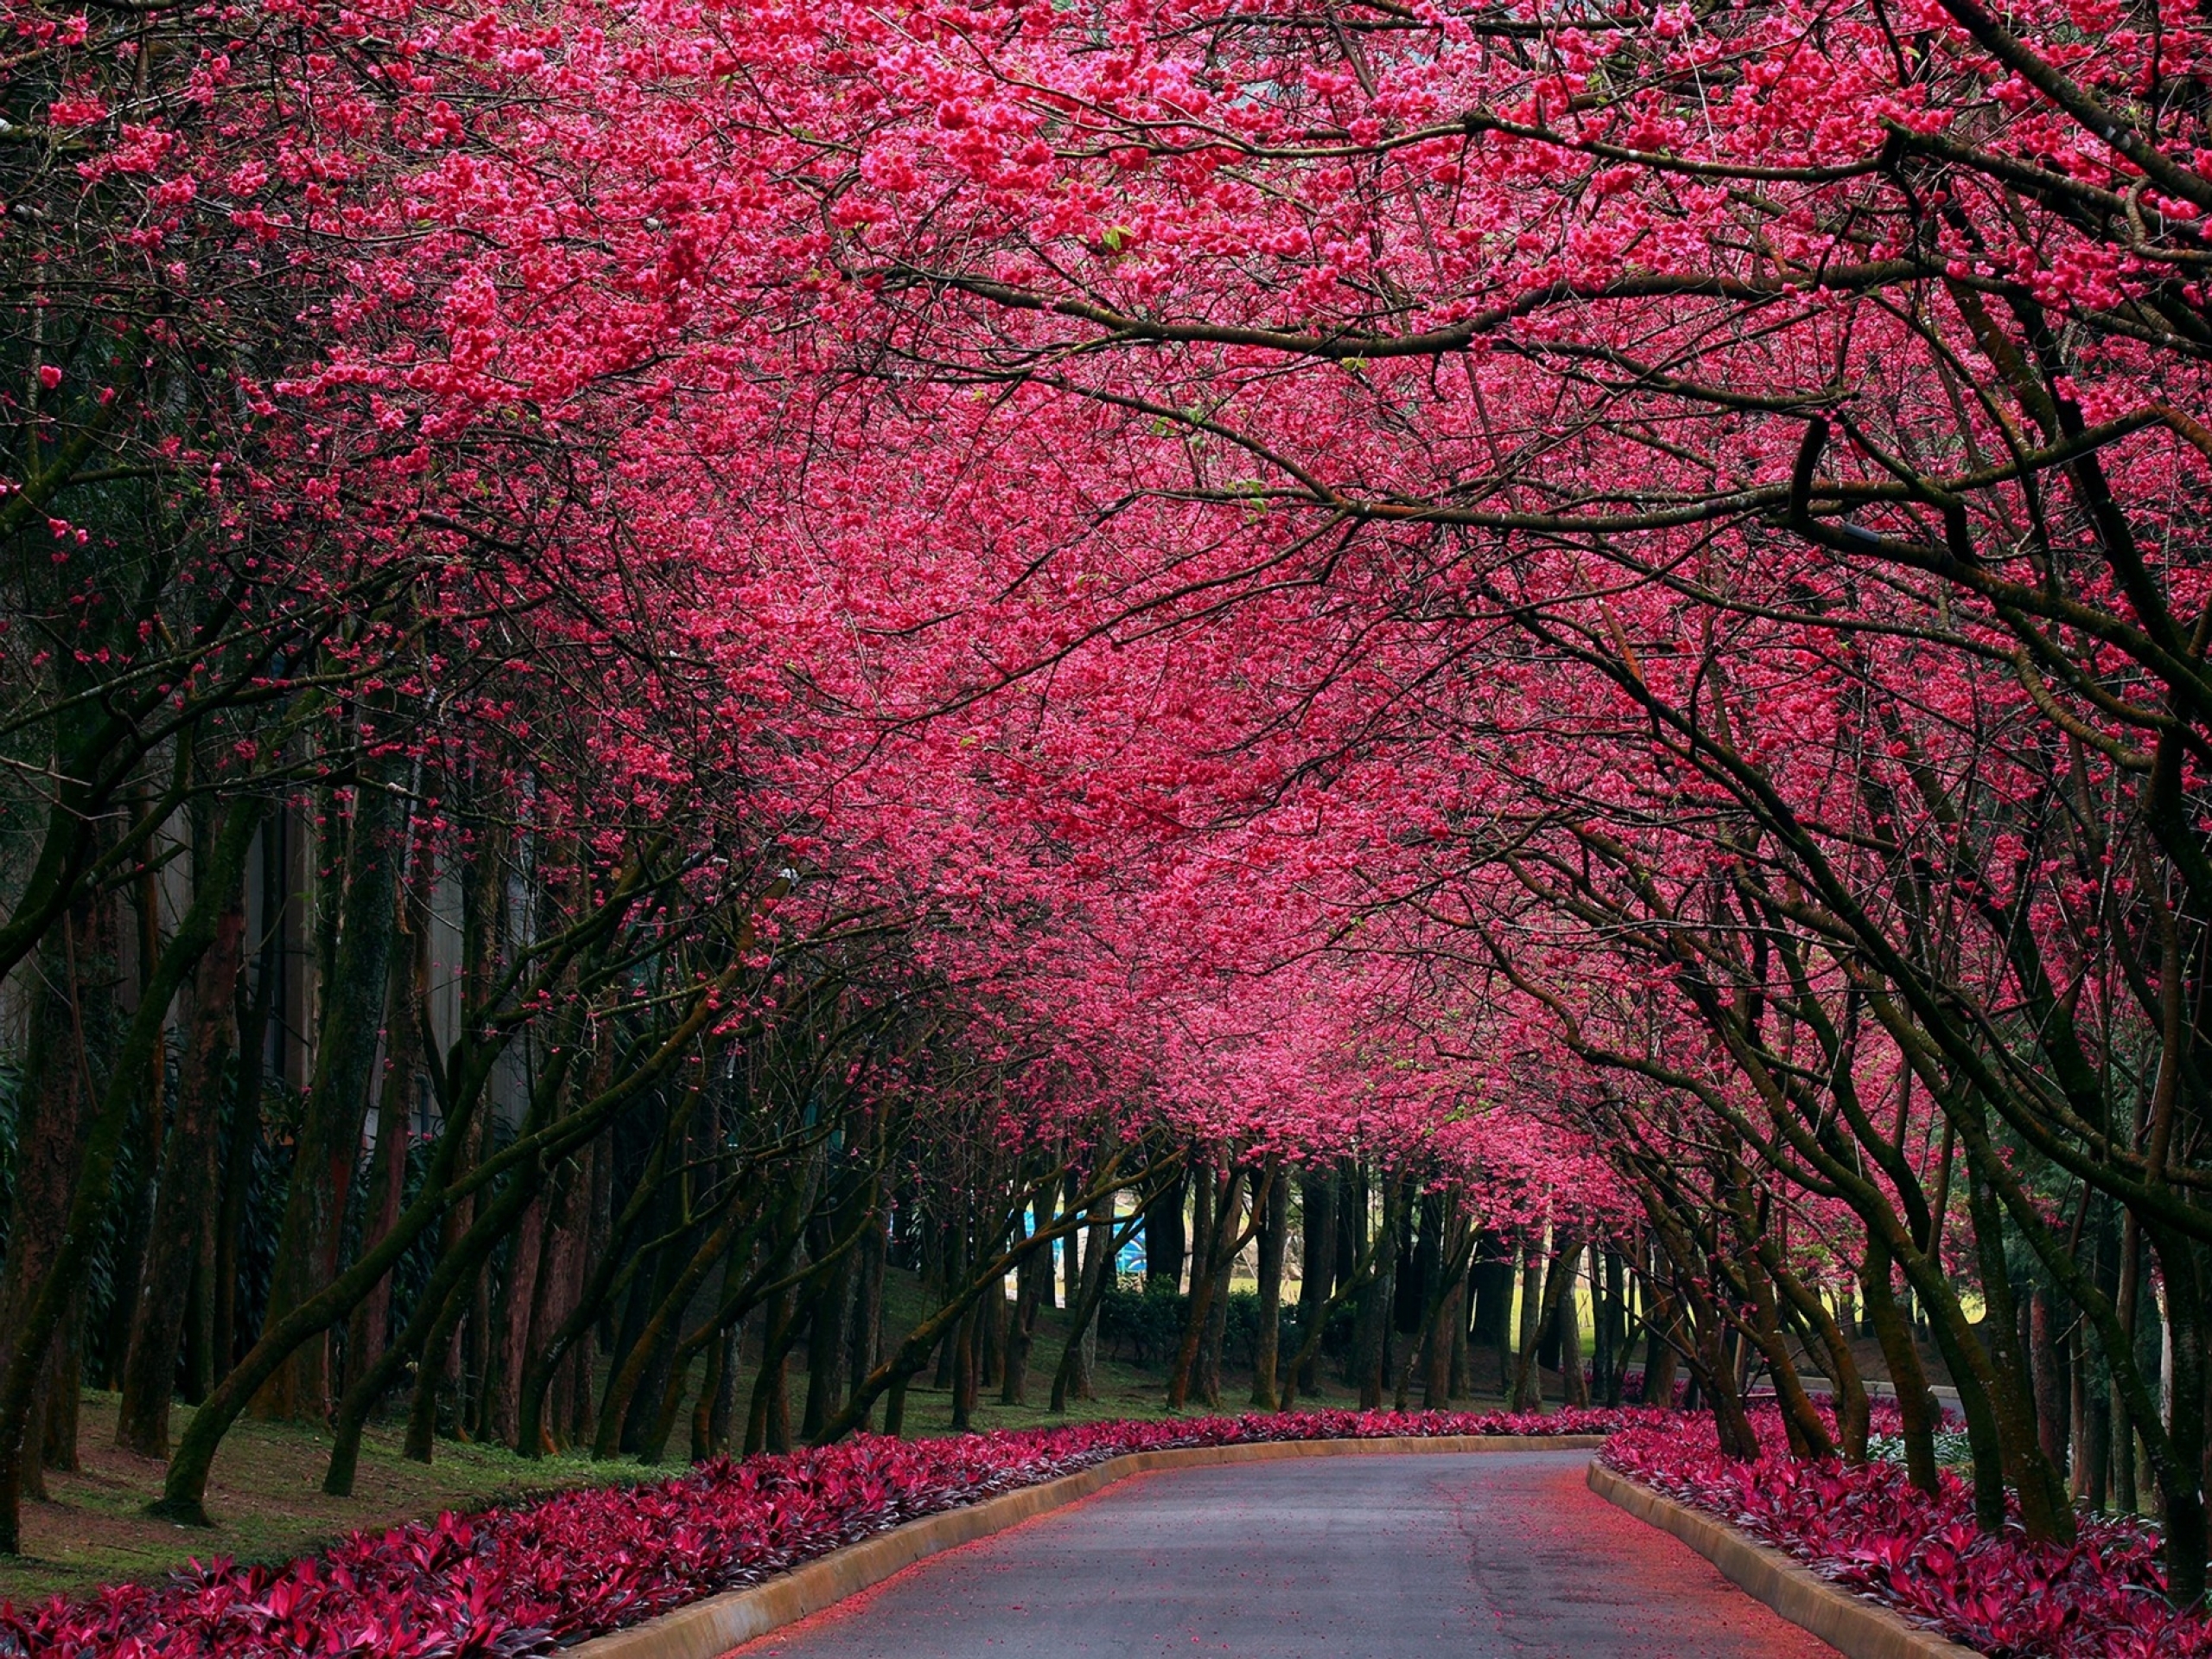 Pink Trees & Road Spring Time wallpaper. Pink Trees & Road Spring Time